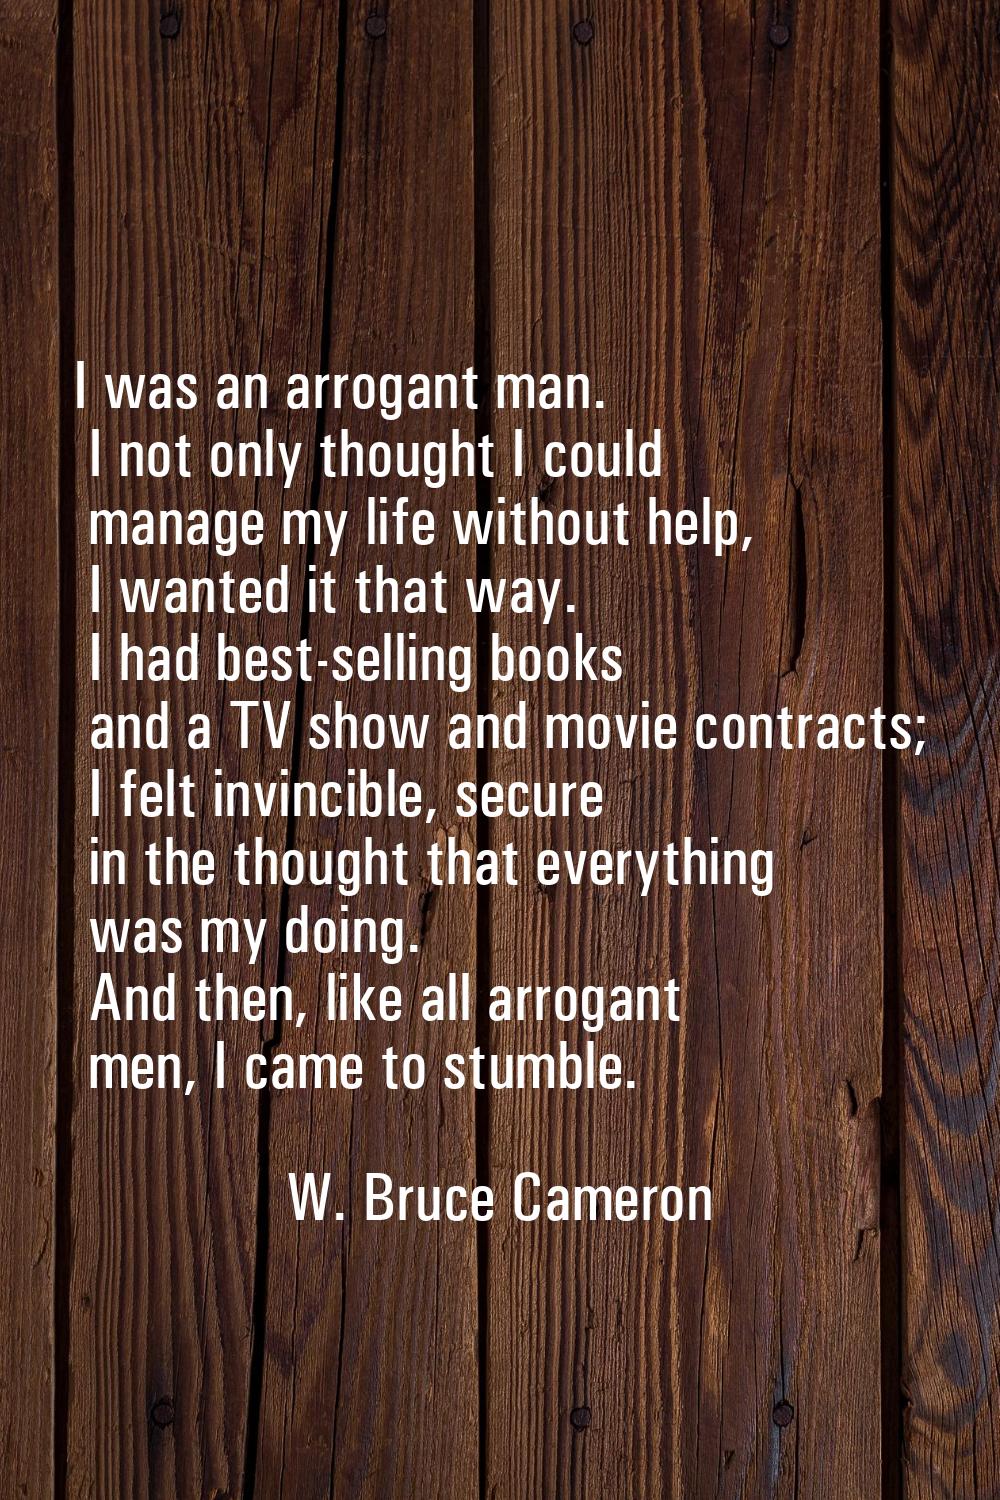 I was an arrogant man. I not only thought I could manage my life without help, I wanted it that way